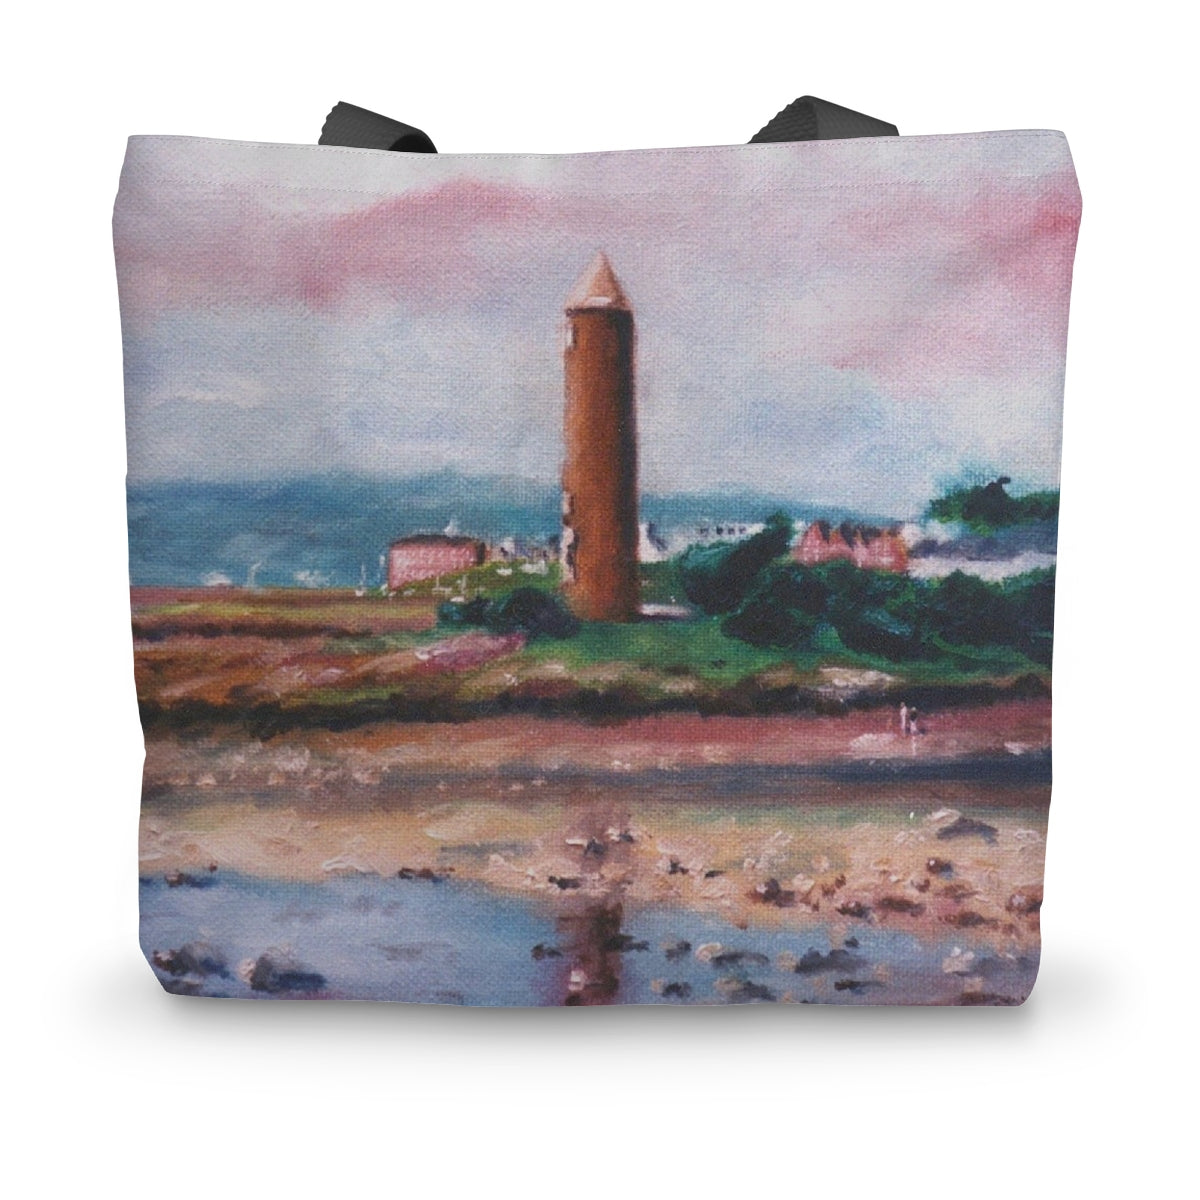 Pencil Point Largs Art Gifts Canvas Tote Bag-Bags-River Clyde Art Gallery-14"x18.5"-Paintings, Prints, Homeware, Art Gifts From Scotland By Scottish Artist Kevin Hunter